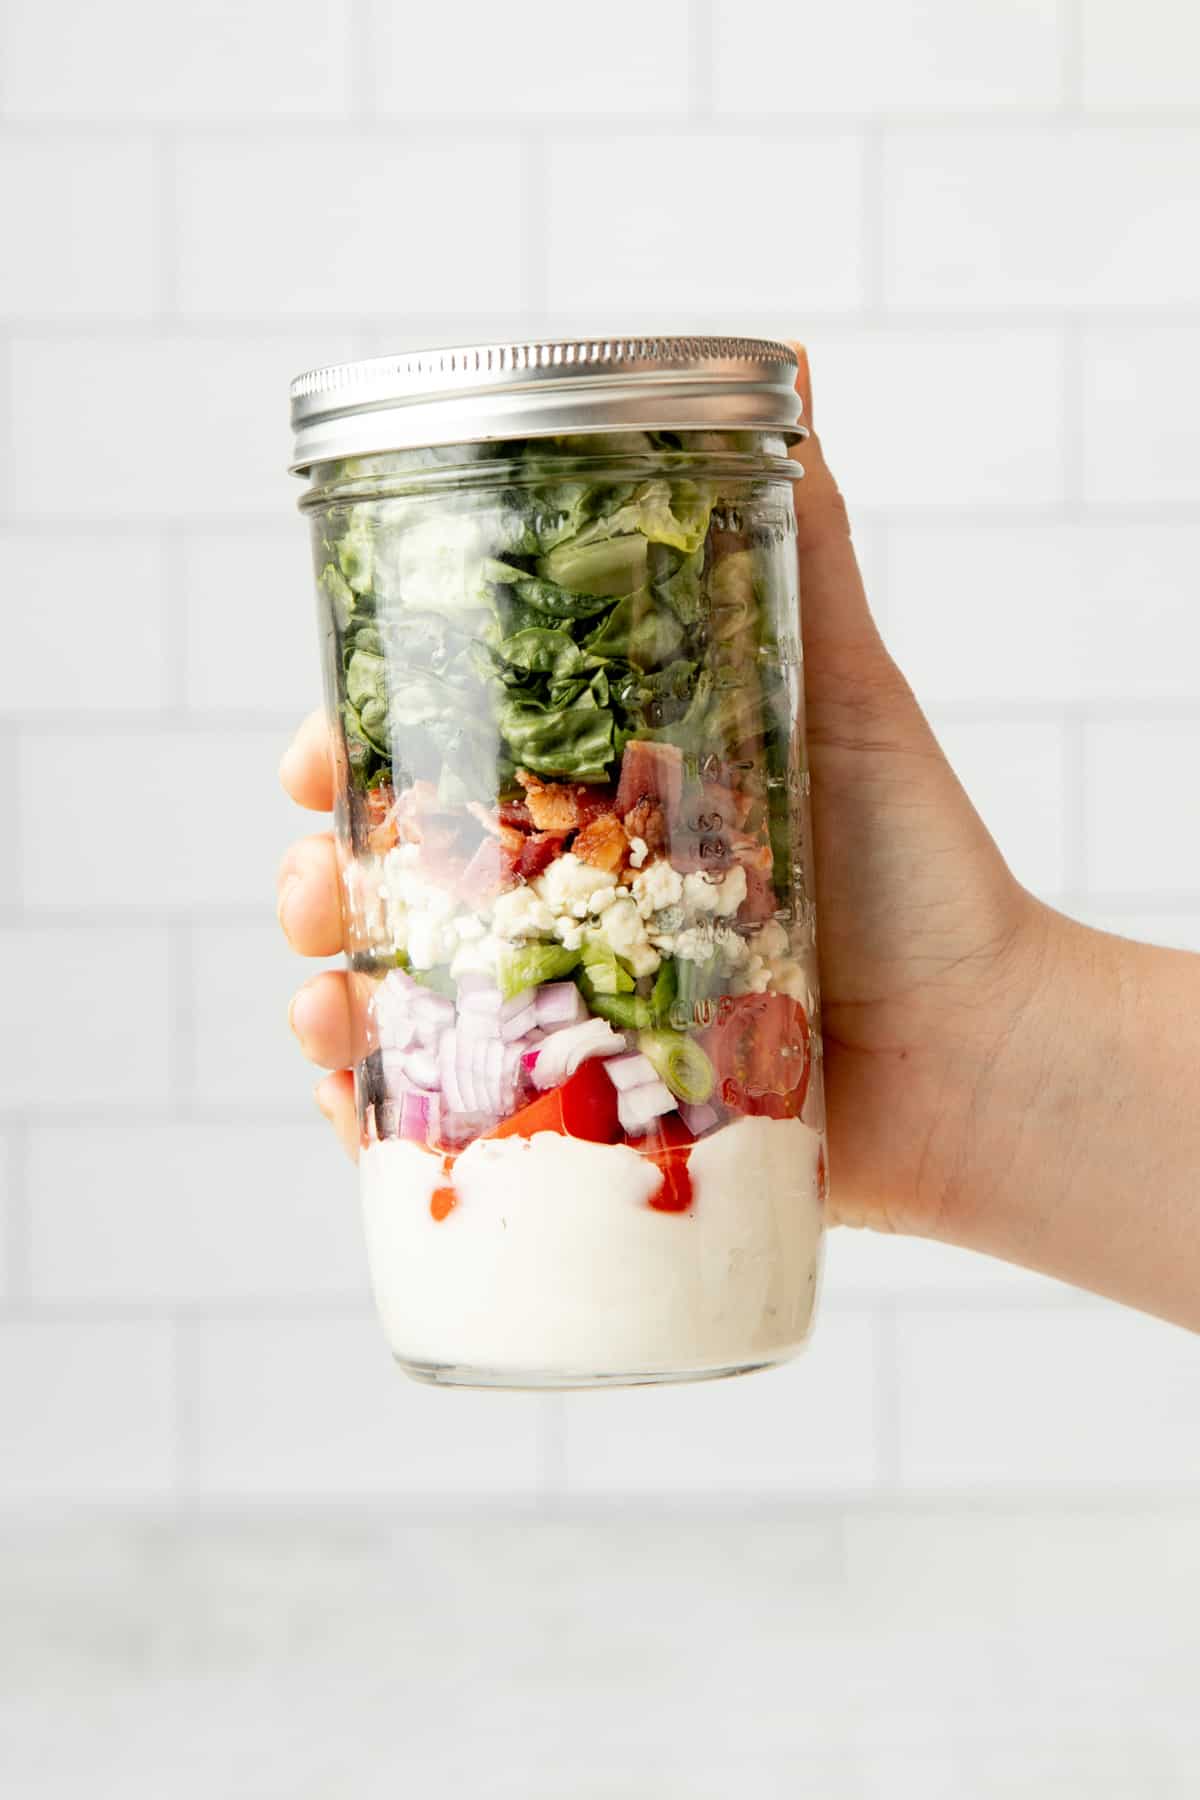 A hand holds a capped mason jar filled with the components of a wedge salad.